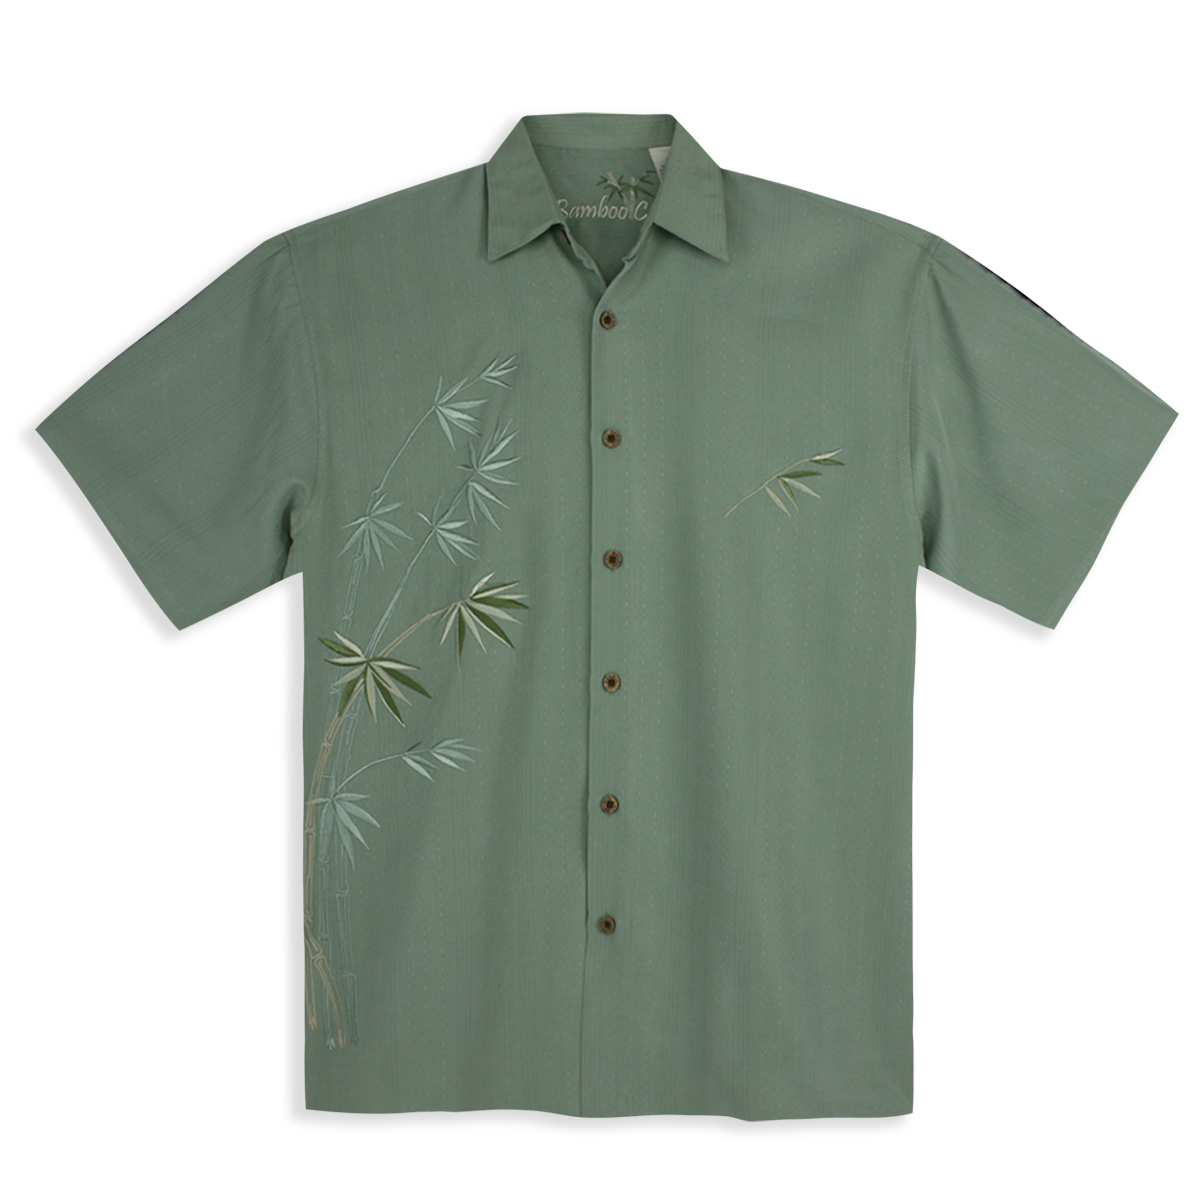 Bamboo Cay Men’s Shirt – Flying Bamboo – Reseda A great shirt for your next vacation. It travels well, so you can wear it as soon as you arrive!